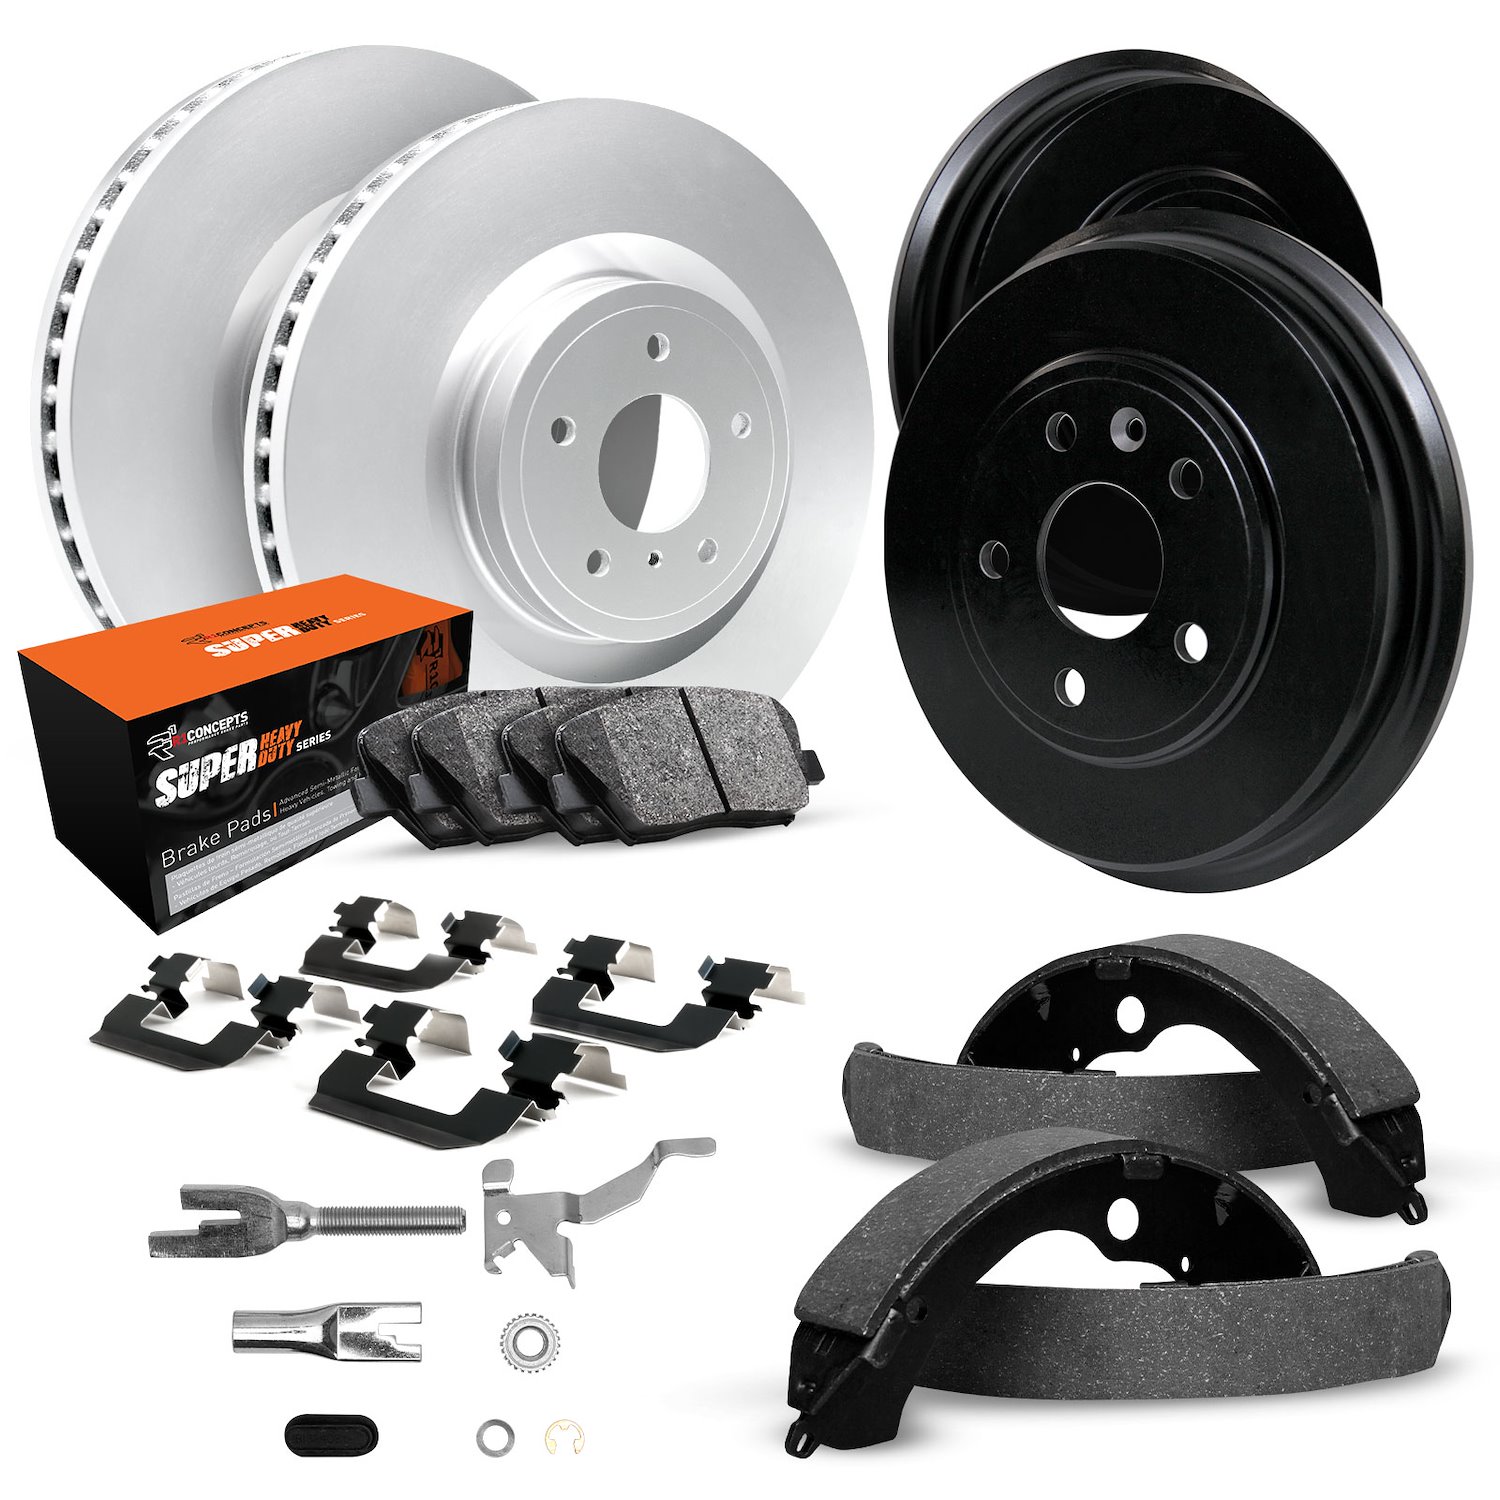 GEO-Carbon Brake Rotor & Drum Set w/Super-Duty Pads, Shoes, Hardware/Adjusters, 1991-1991 GM, Position: Front & Rear